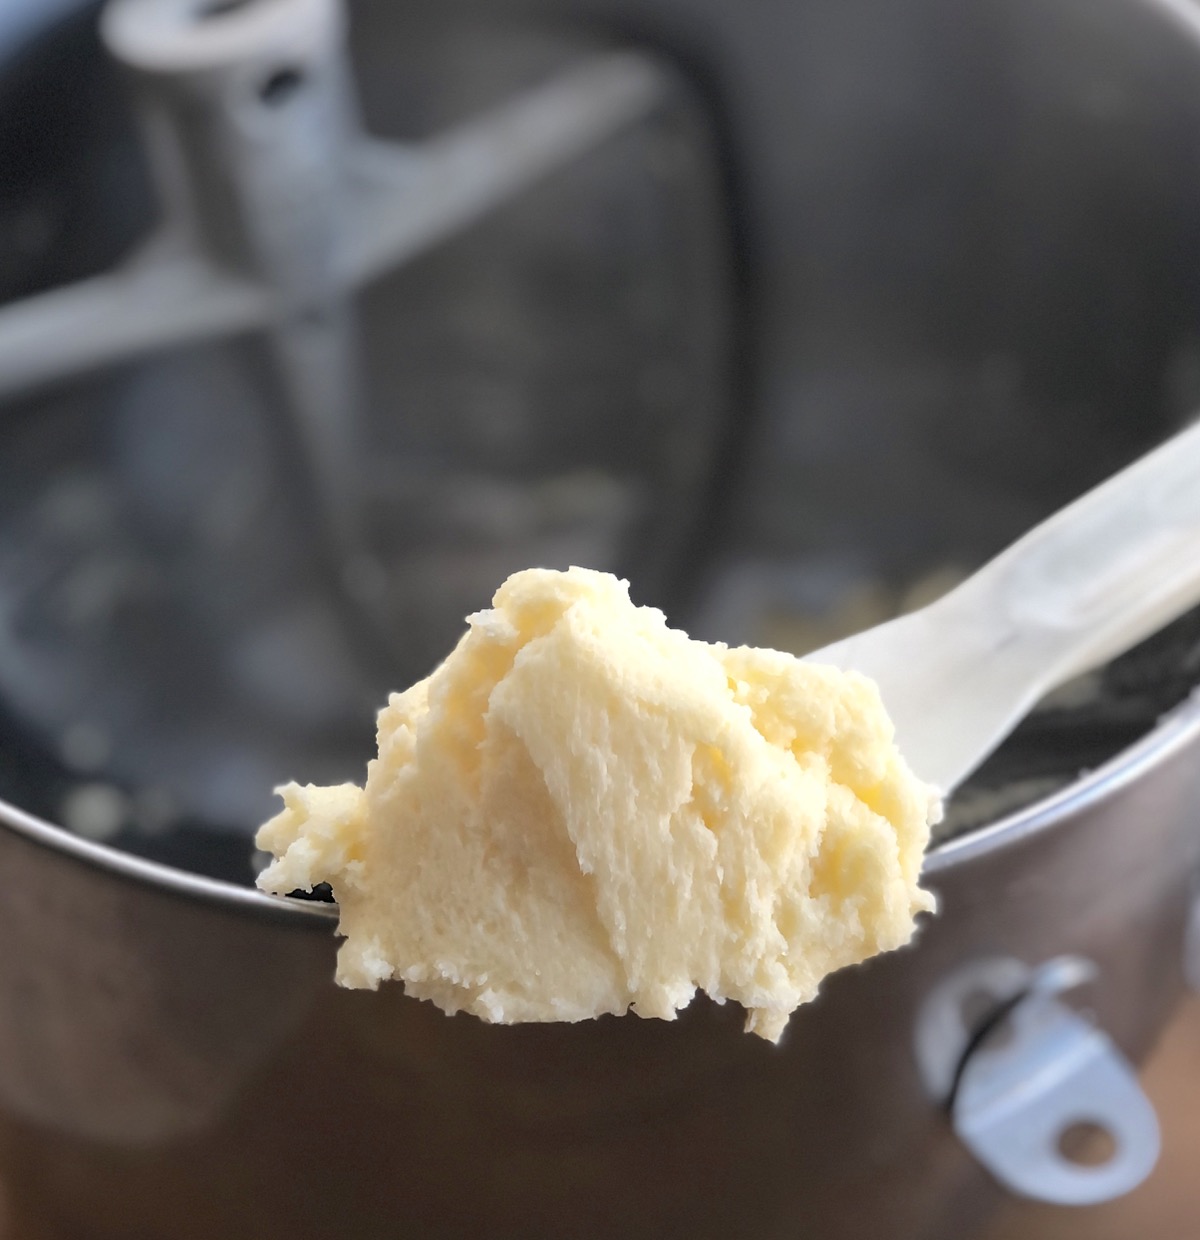 A dollop of butter and sugar beaten until light and fluffy, shown on a spatula above a mixing bowl.